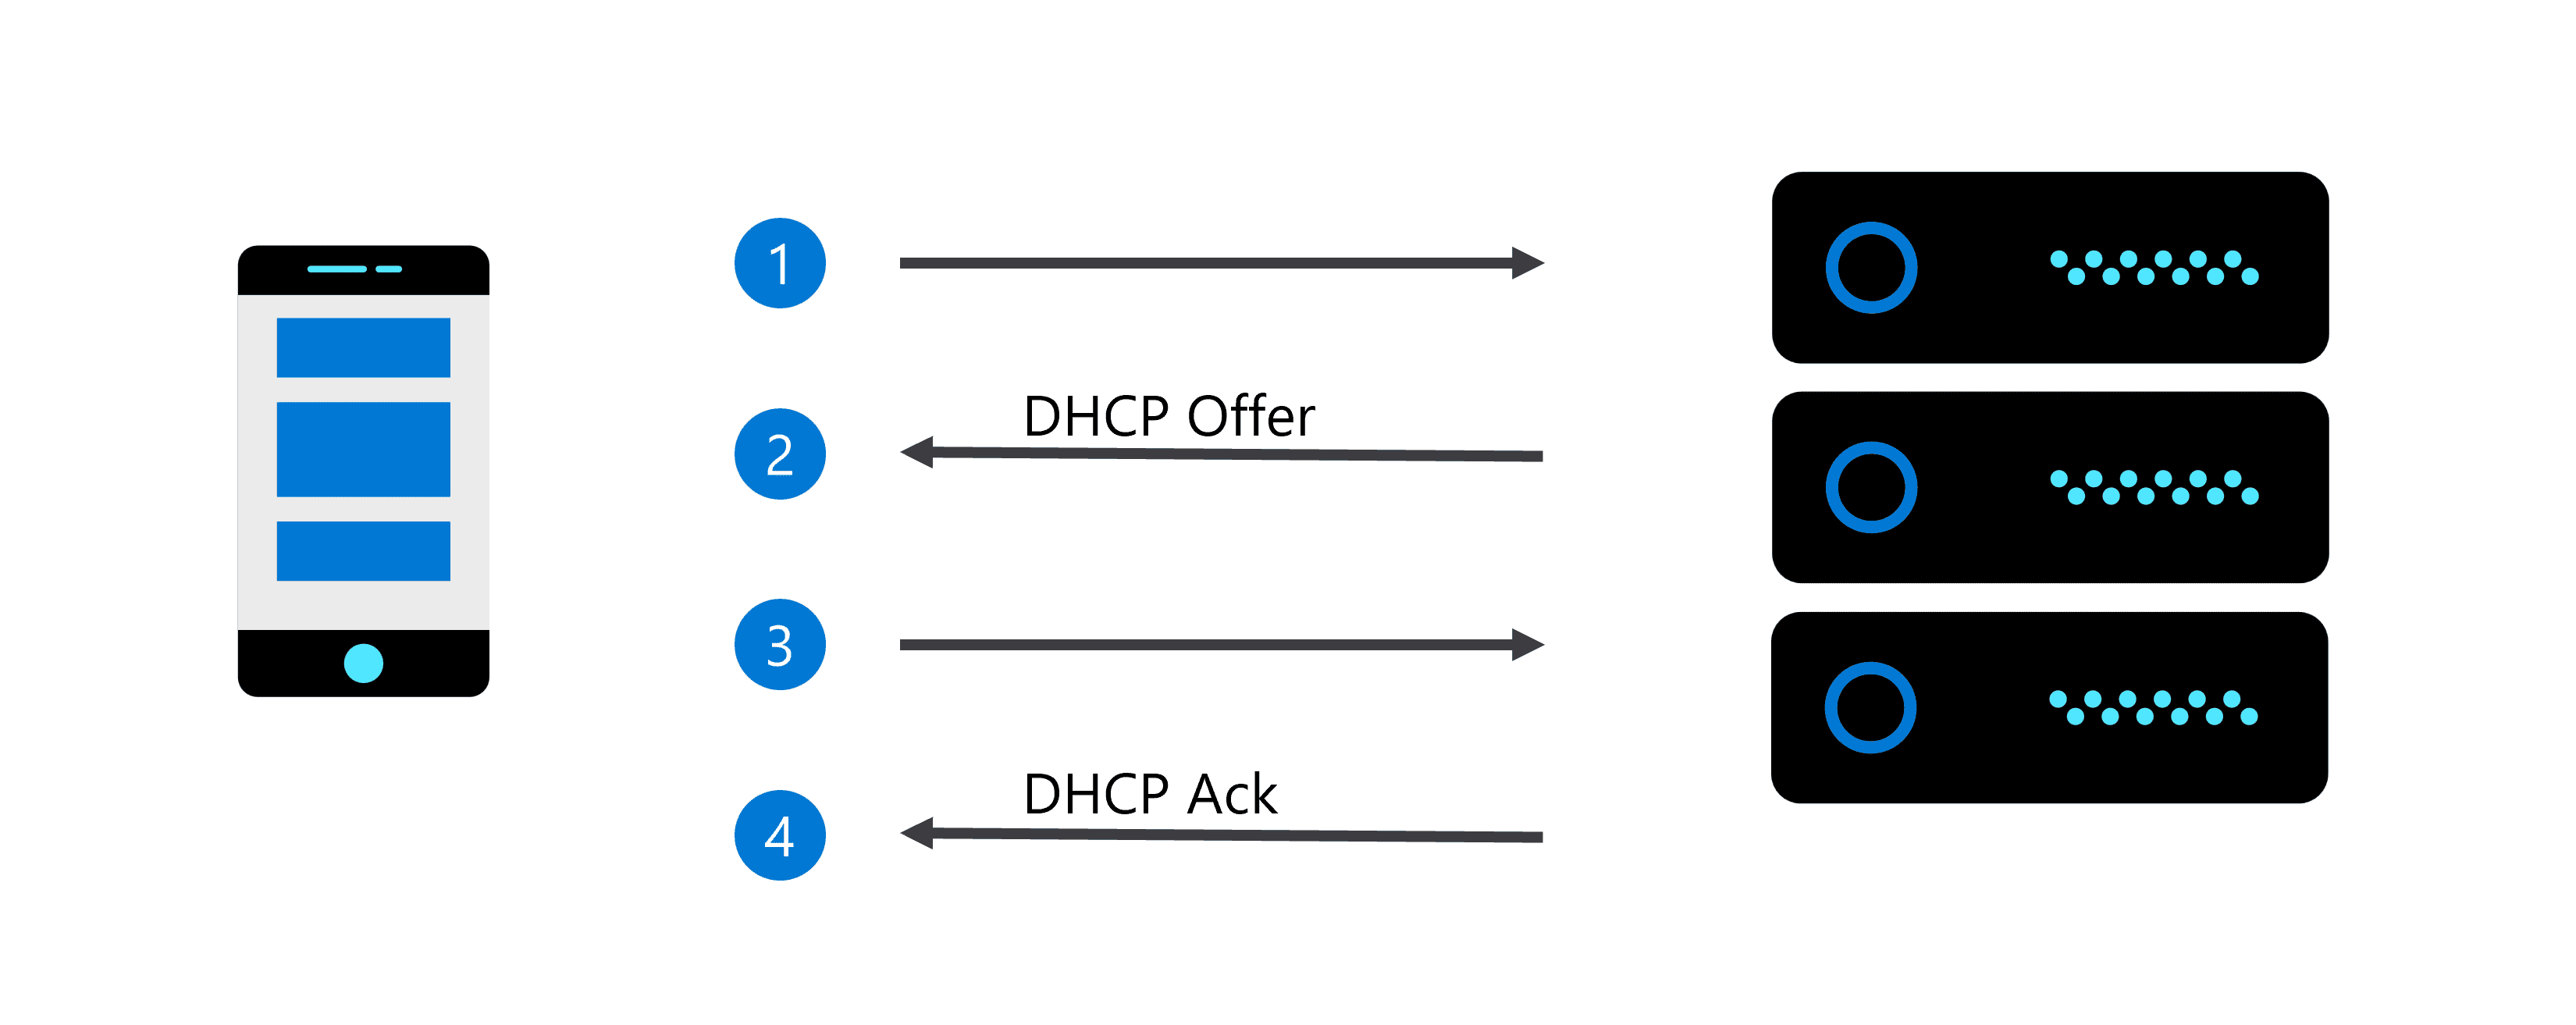 Diagram of the DHCP process with the titles of step 1 and 3 masked out